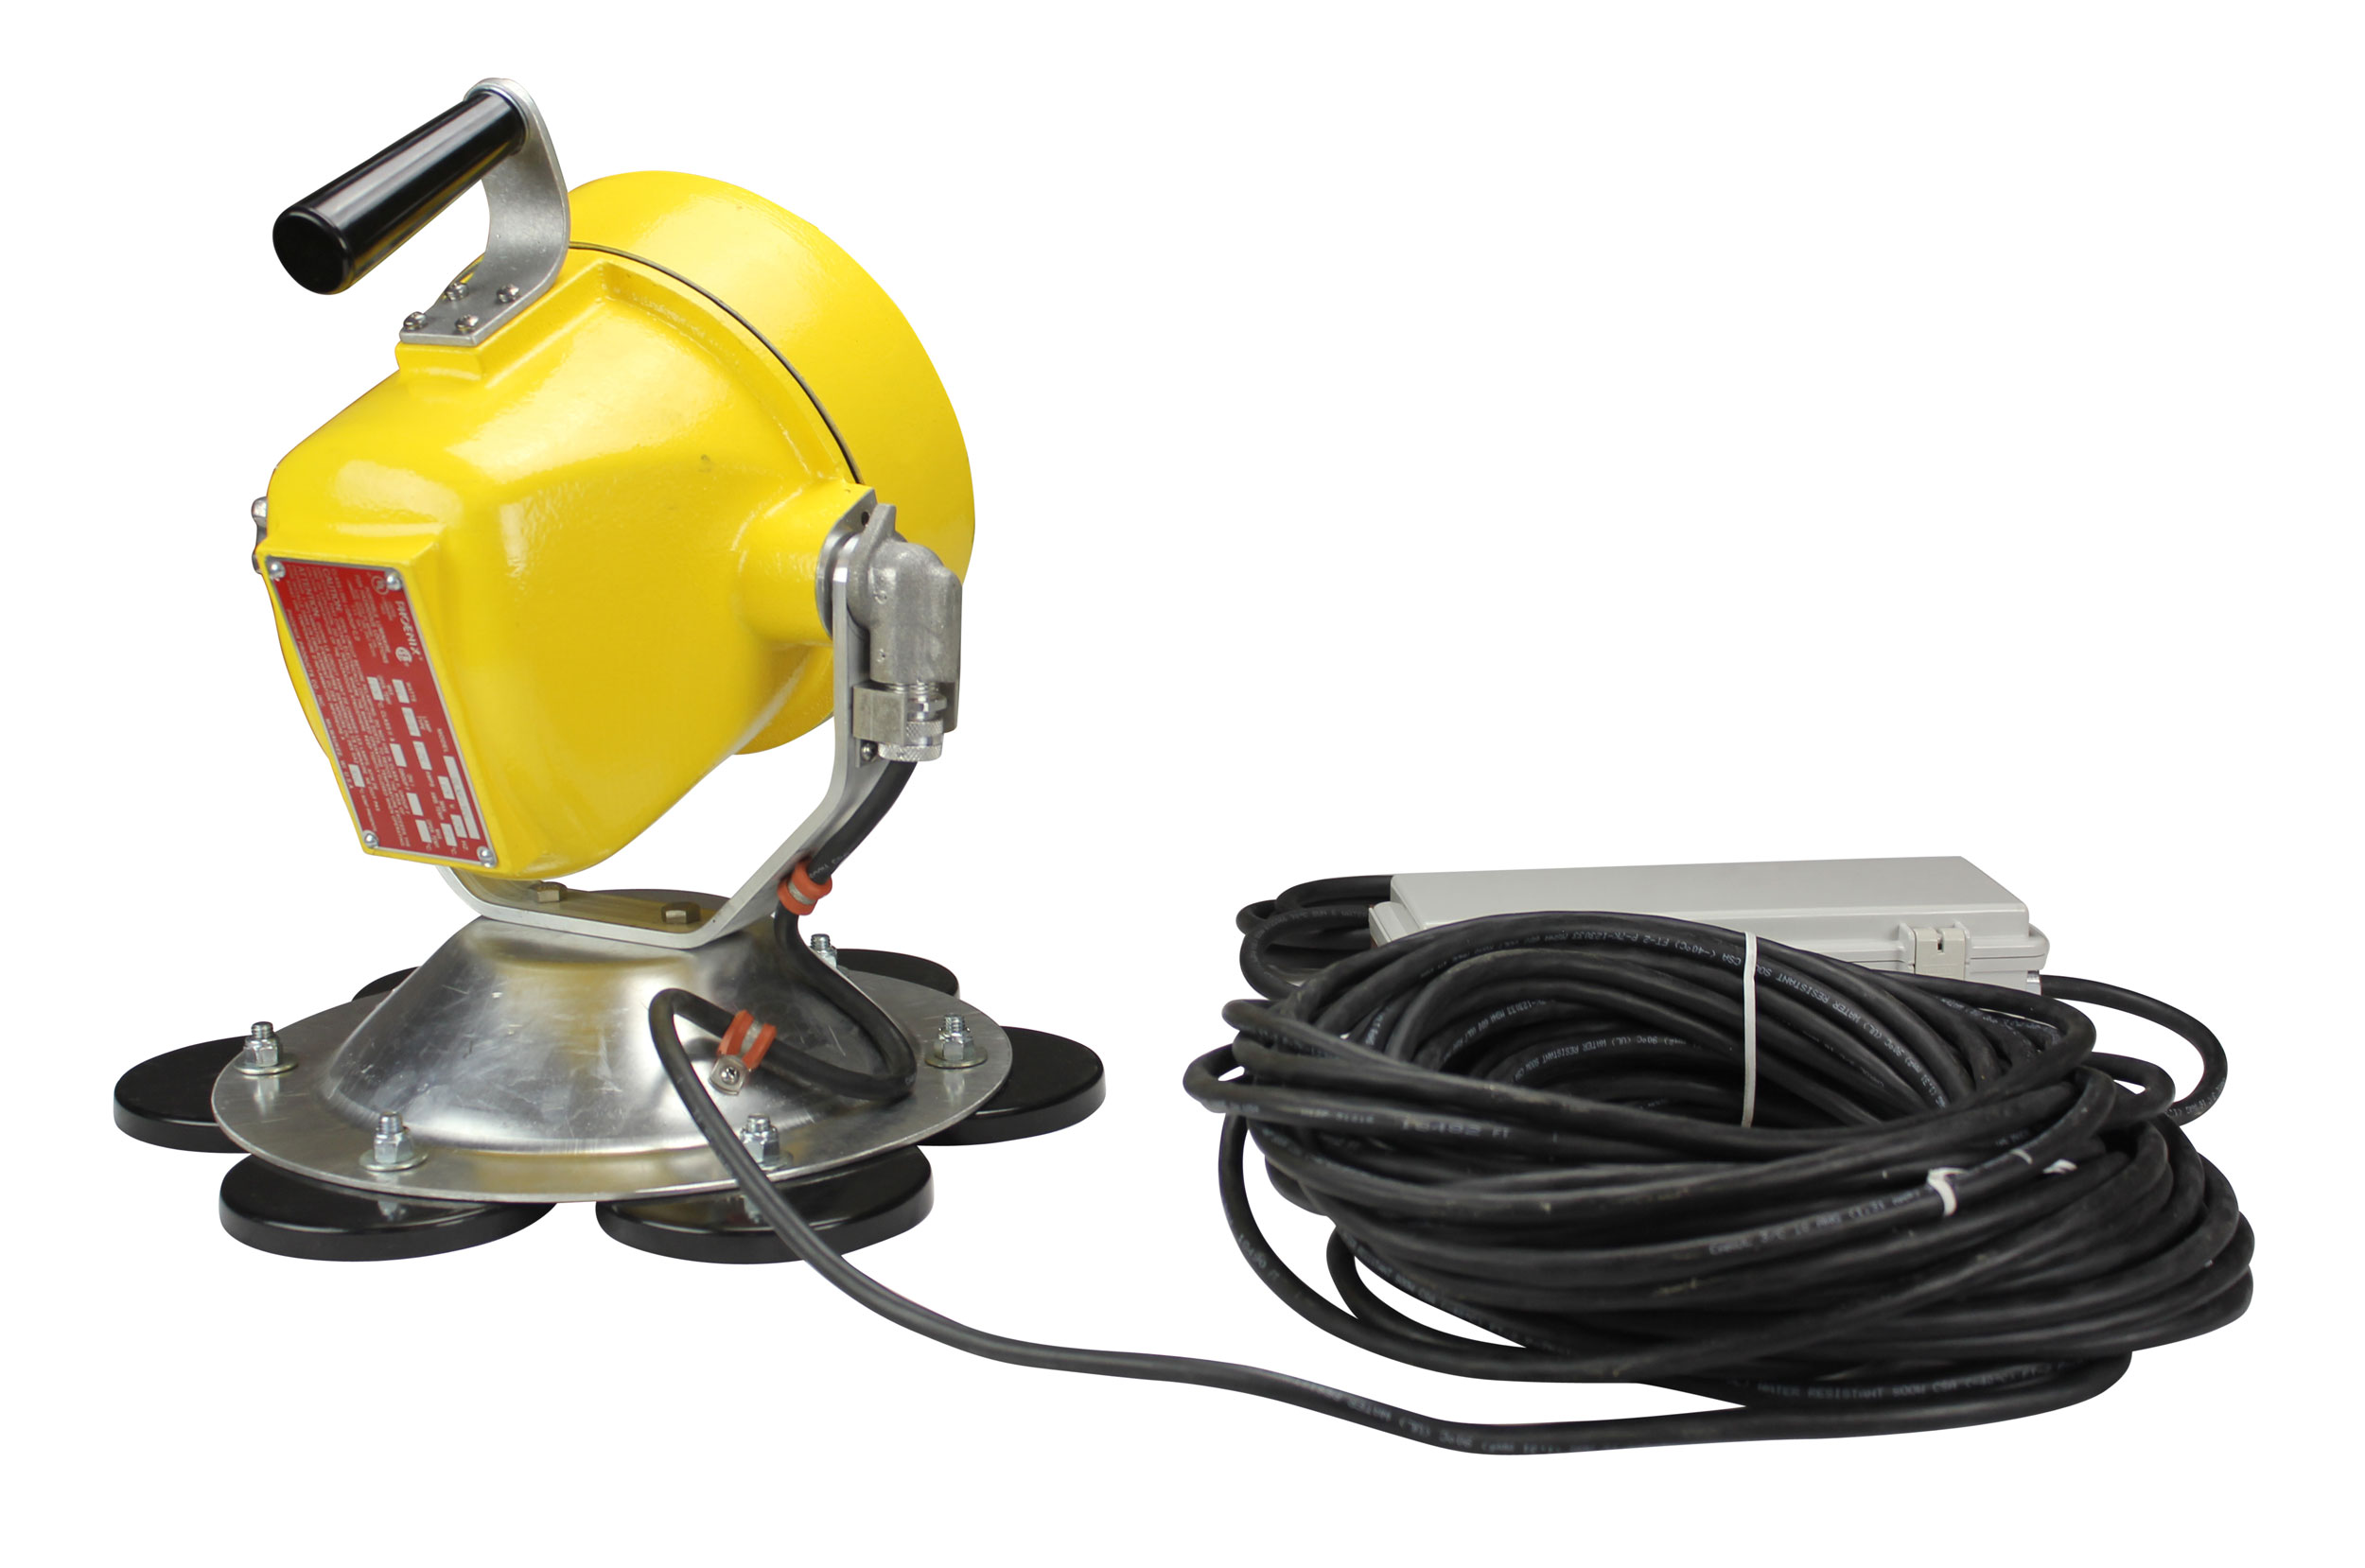 Magnetically Mounted Explosion Proof LED Light for Hazardous Locations